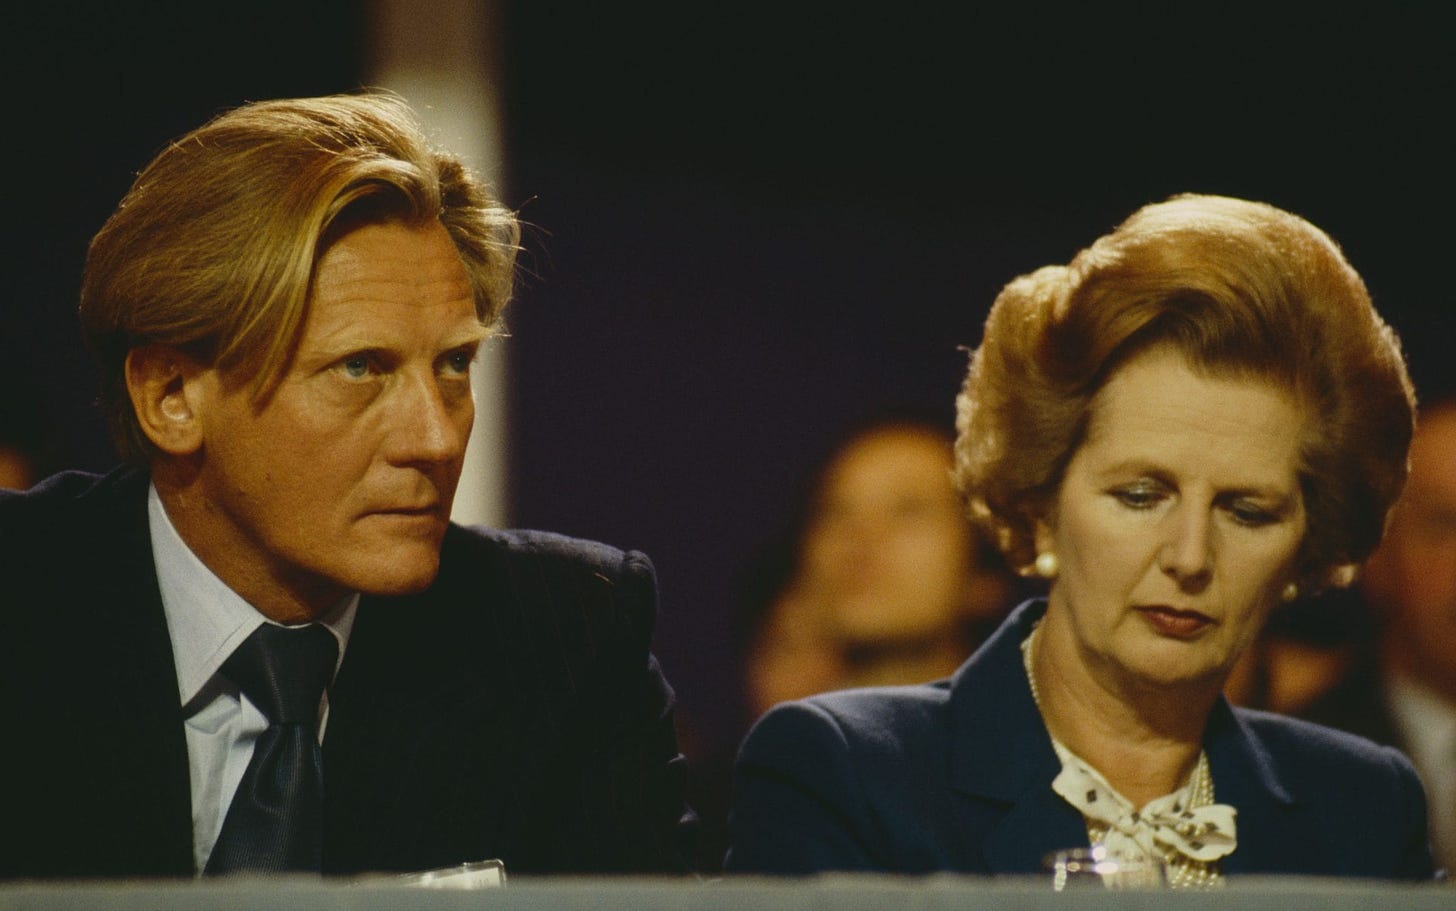 Michael Heseltine: I didn't think Margaret Thatcher was leadership material